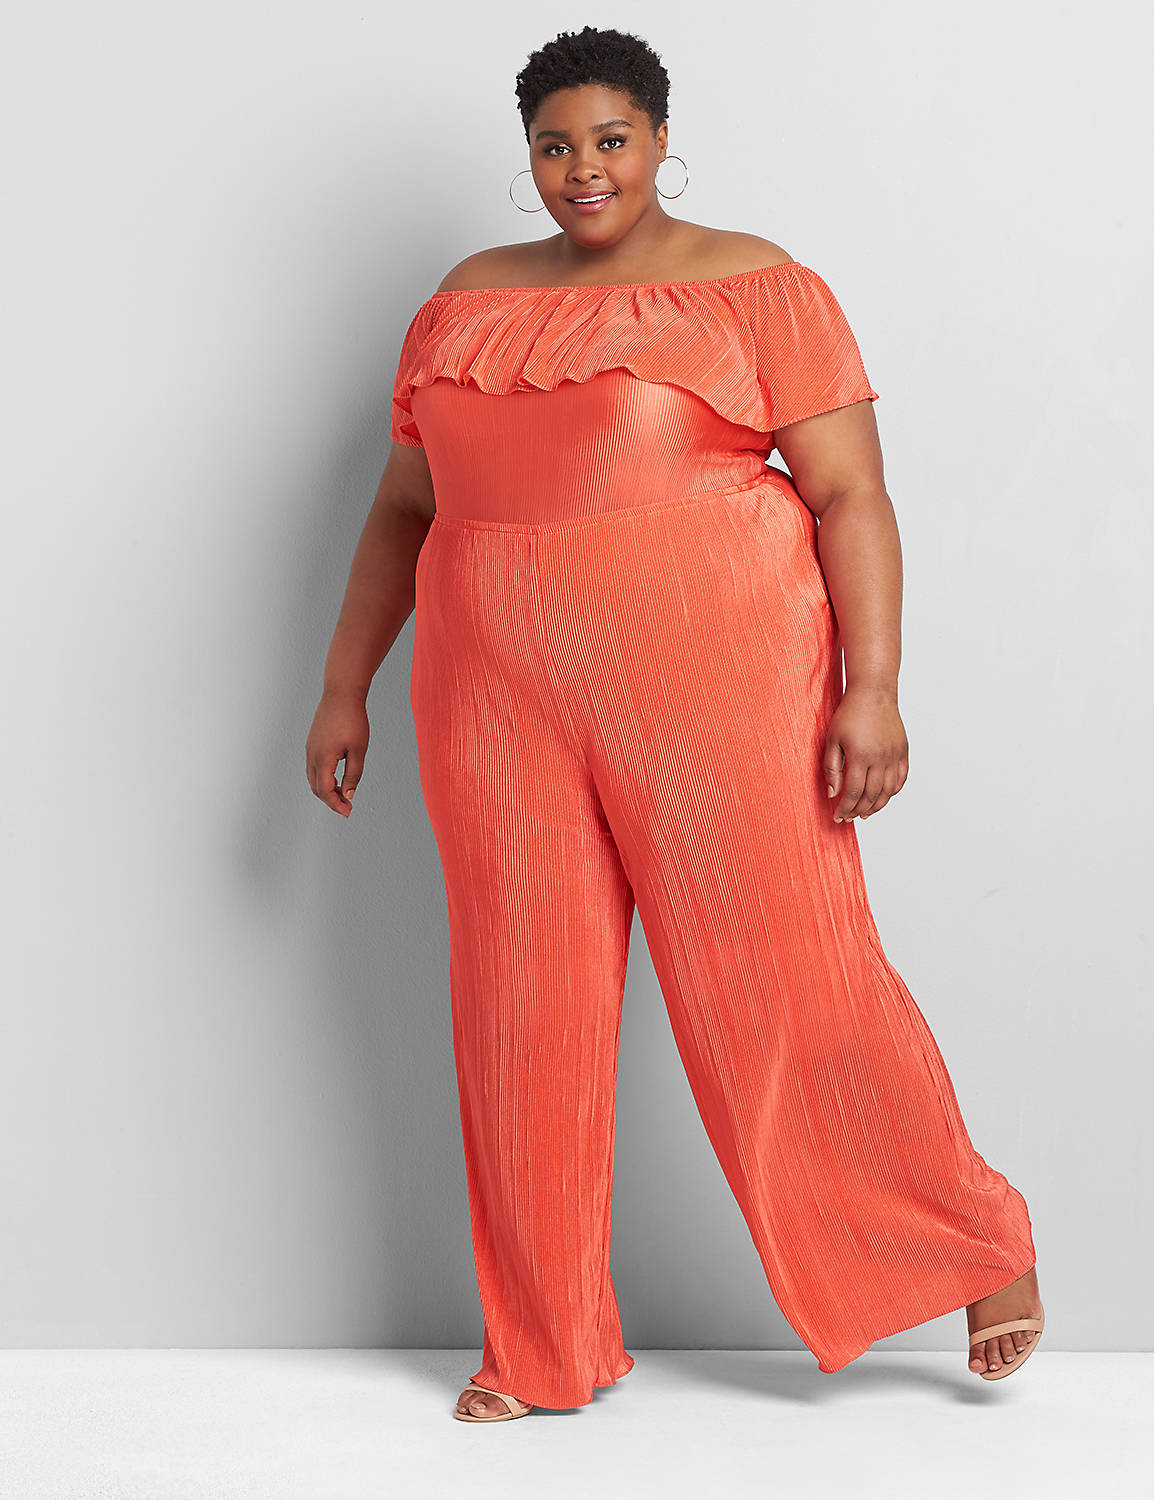 4 Way Off The Shoulder Micro Pleated Jumpsuit 1118579:Starfish Coral CSI 0301184:14/16 Product Image 1